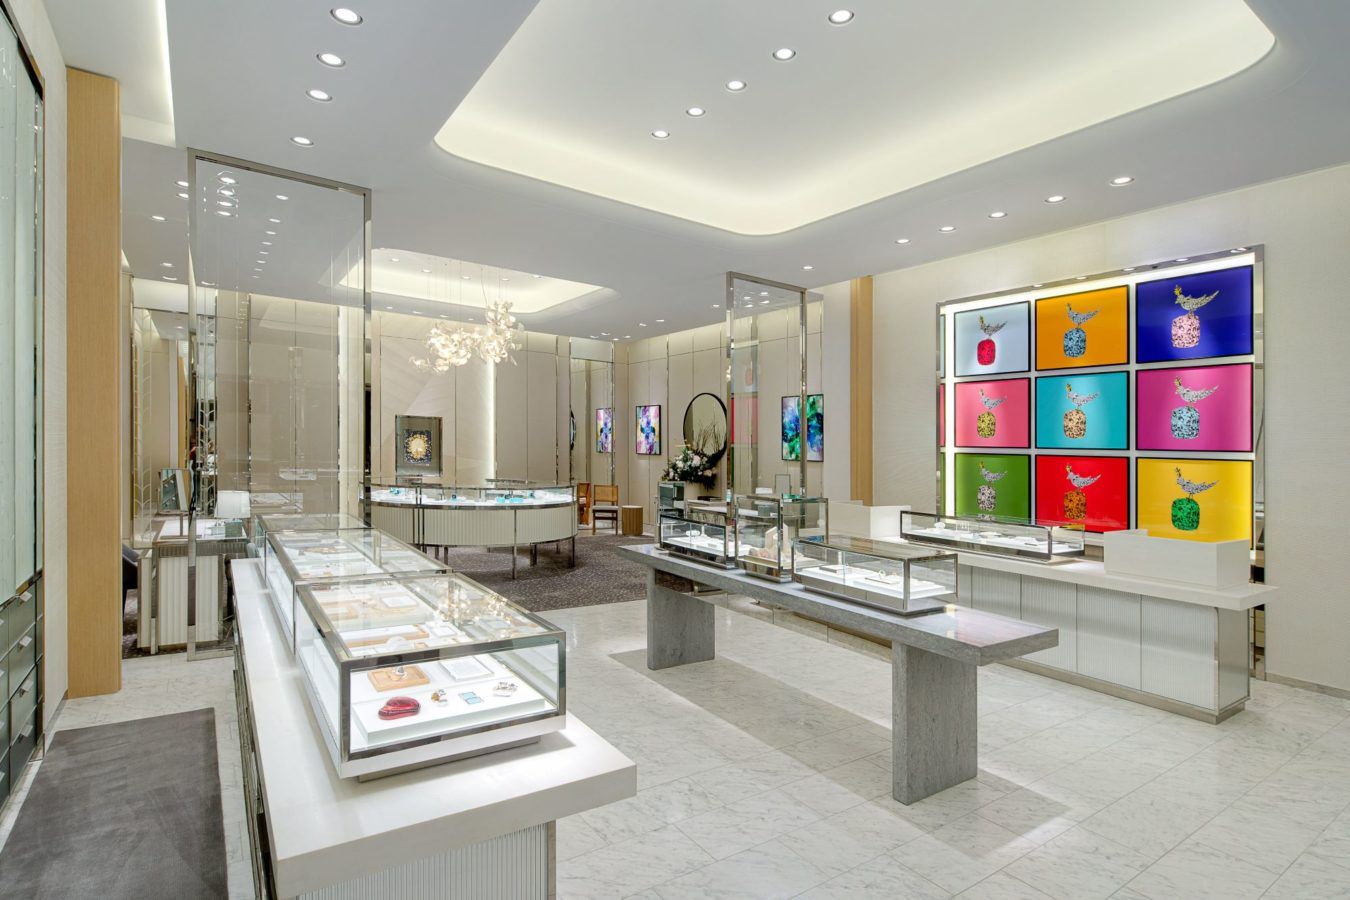 Inside Tiffany & Co's new boutique at The Gardens Mall, Kuala Lumpur